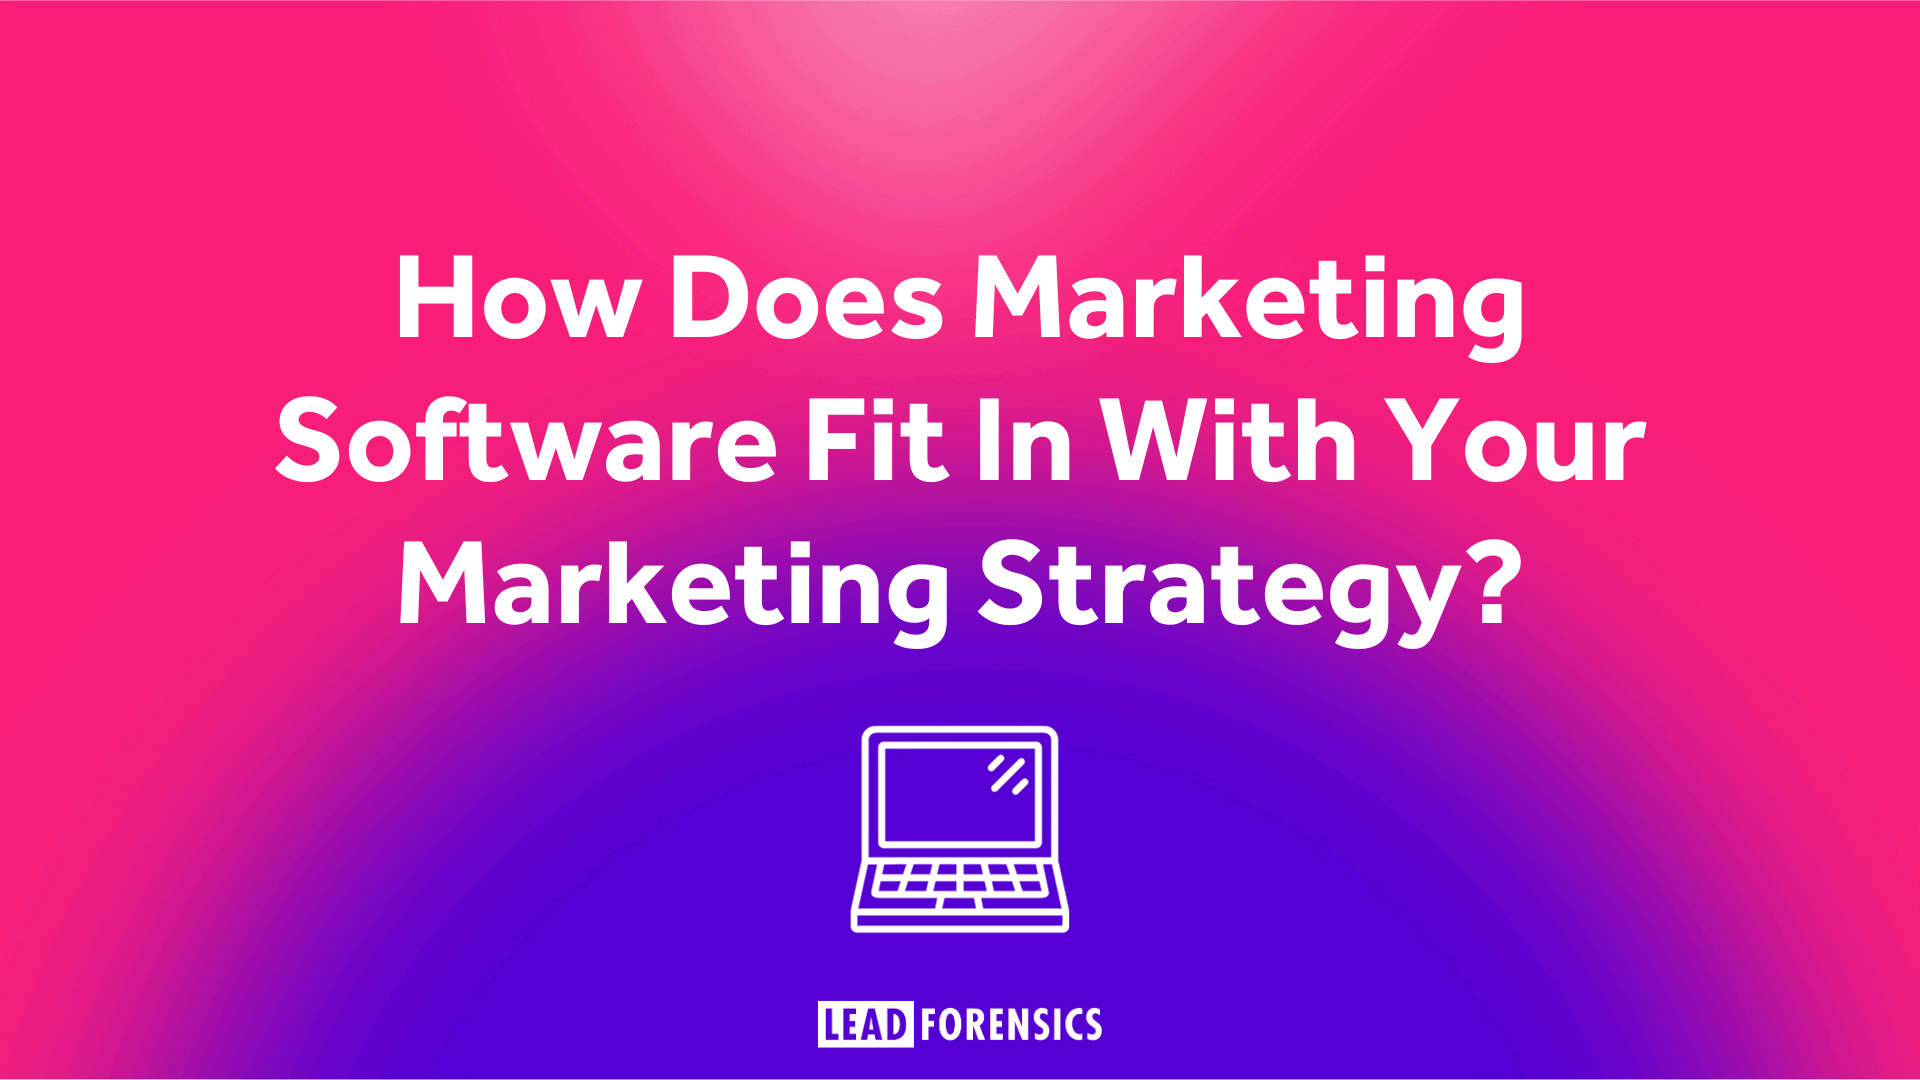 How Does Marketing Software Fit In With Your Marketing Strategy